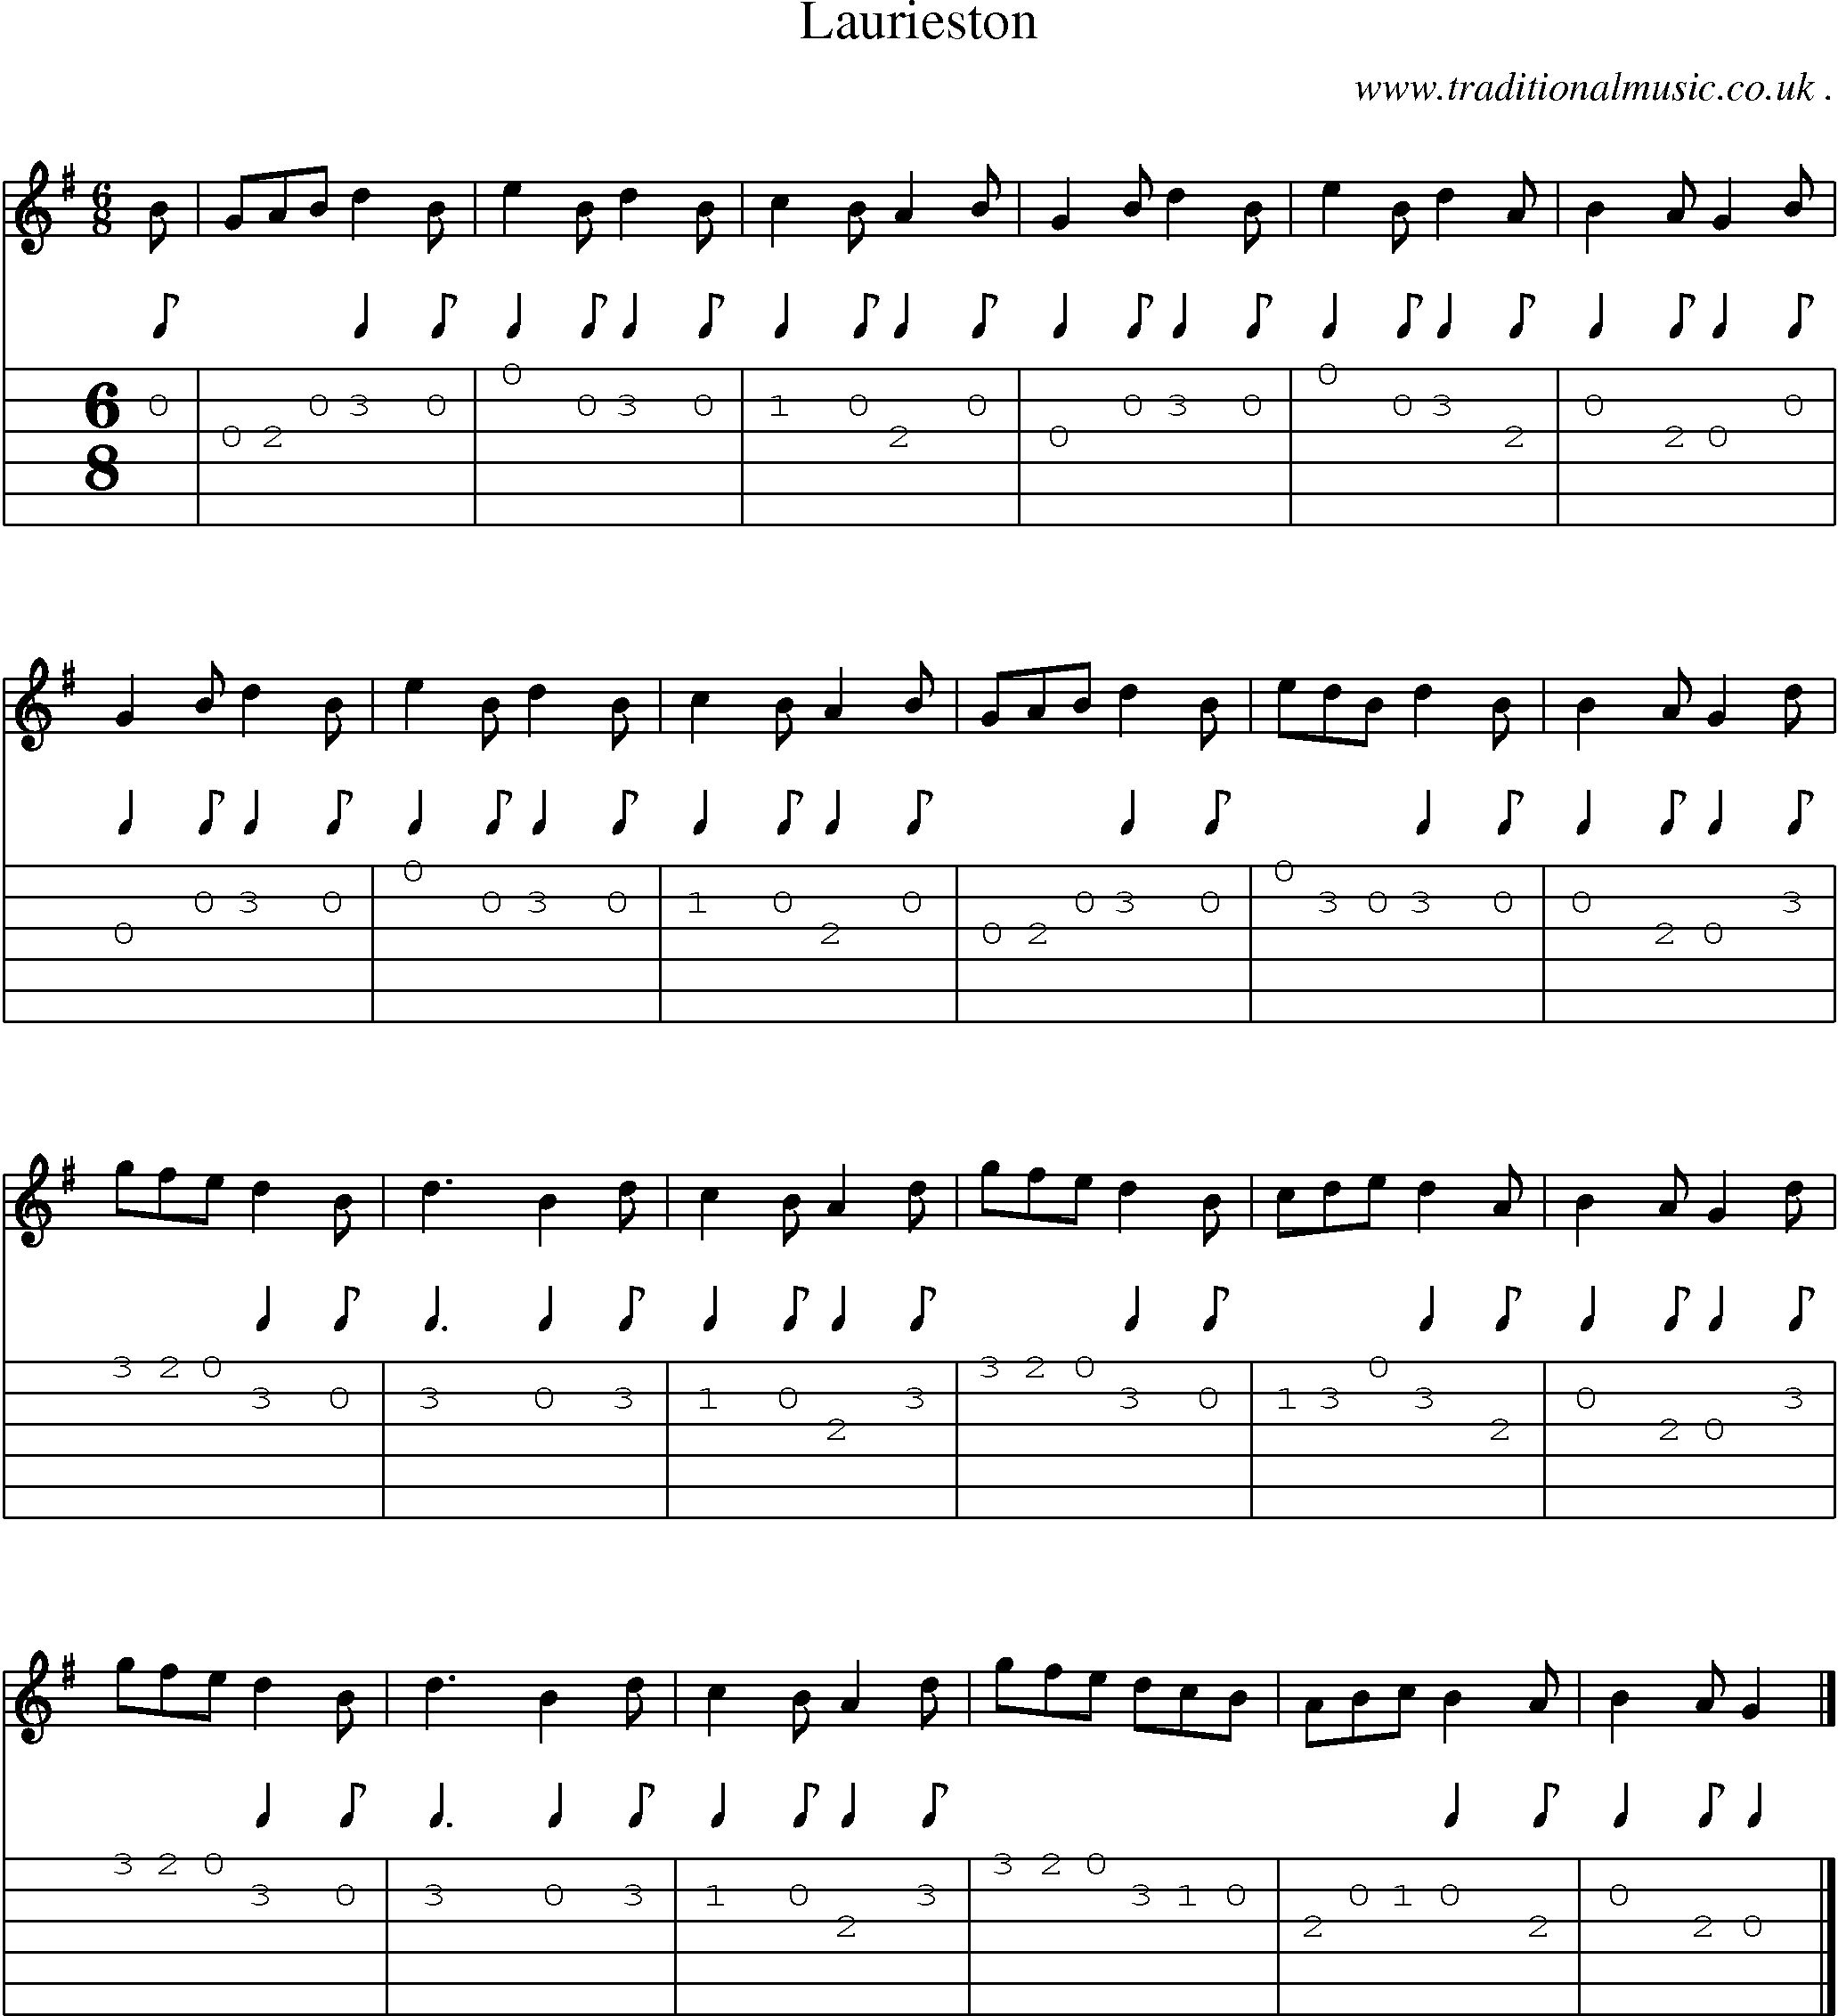 Sheet-music  score, Chords and Guitar Tabs for Laurieston